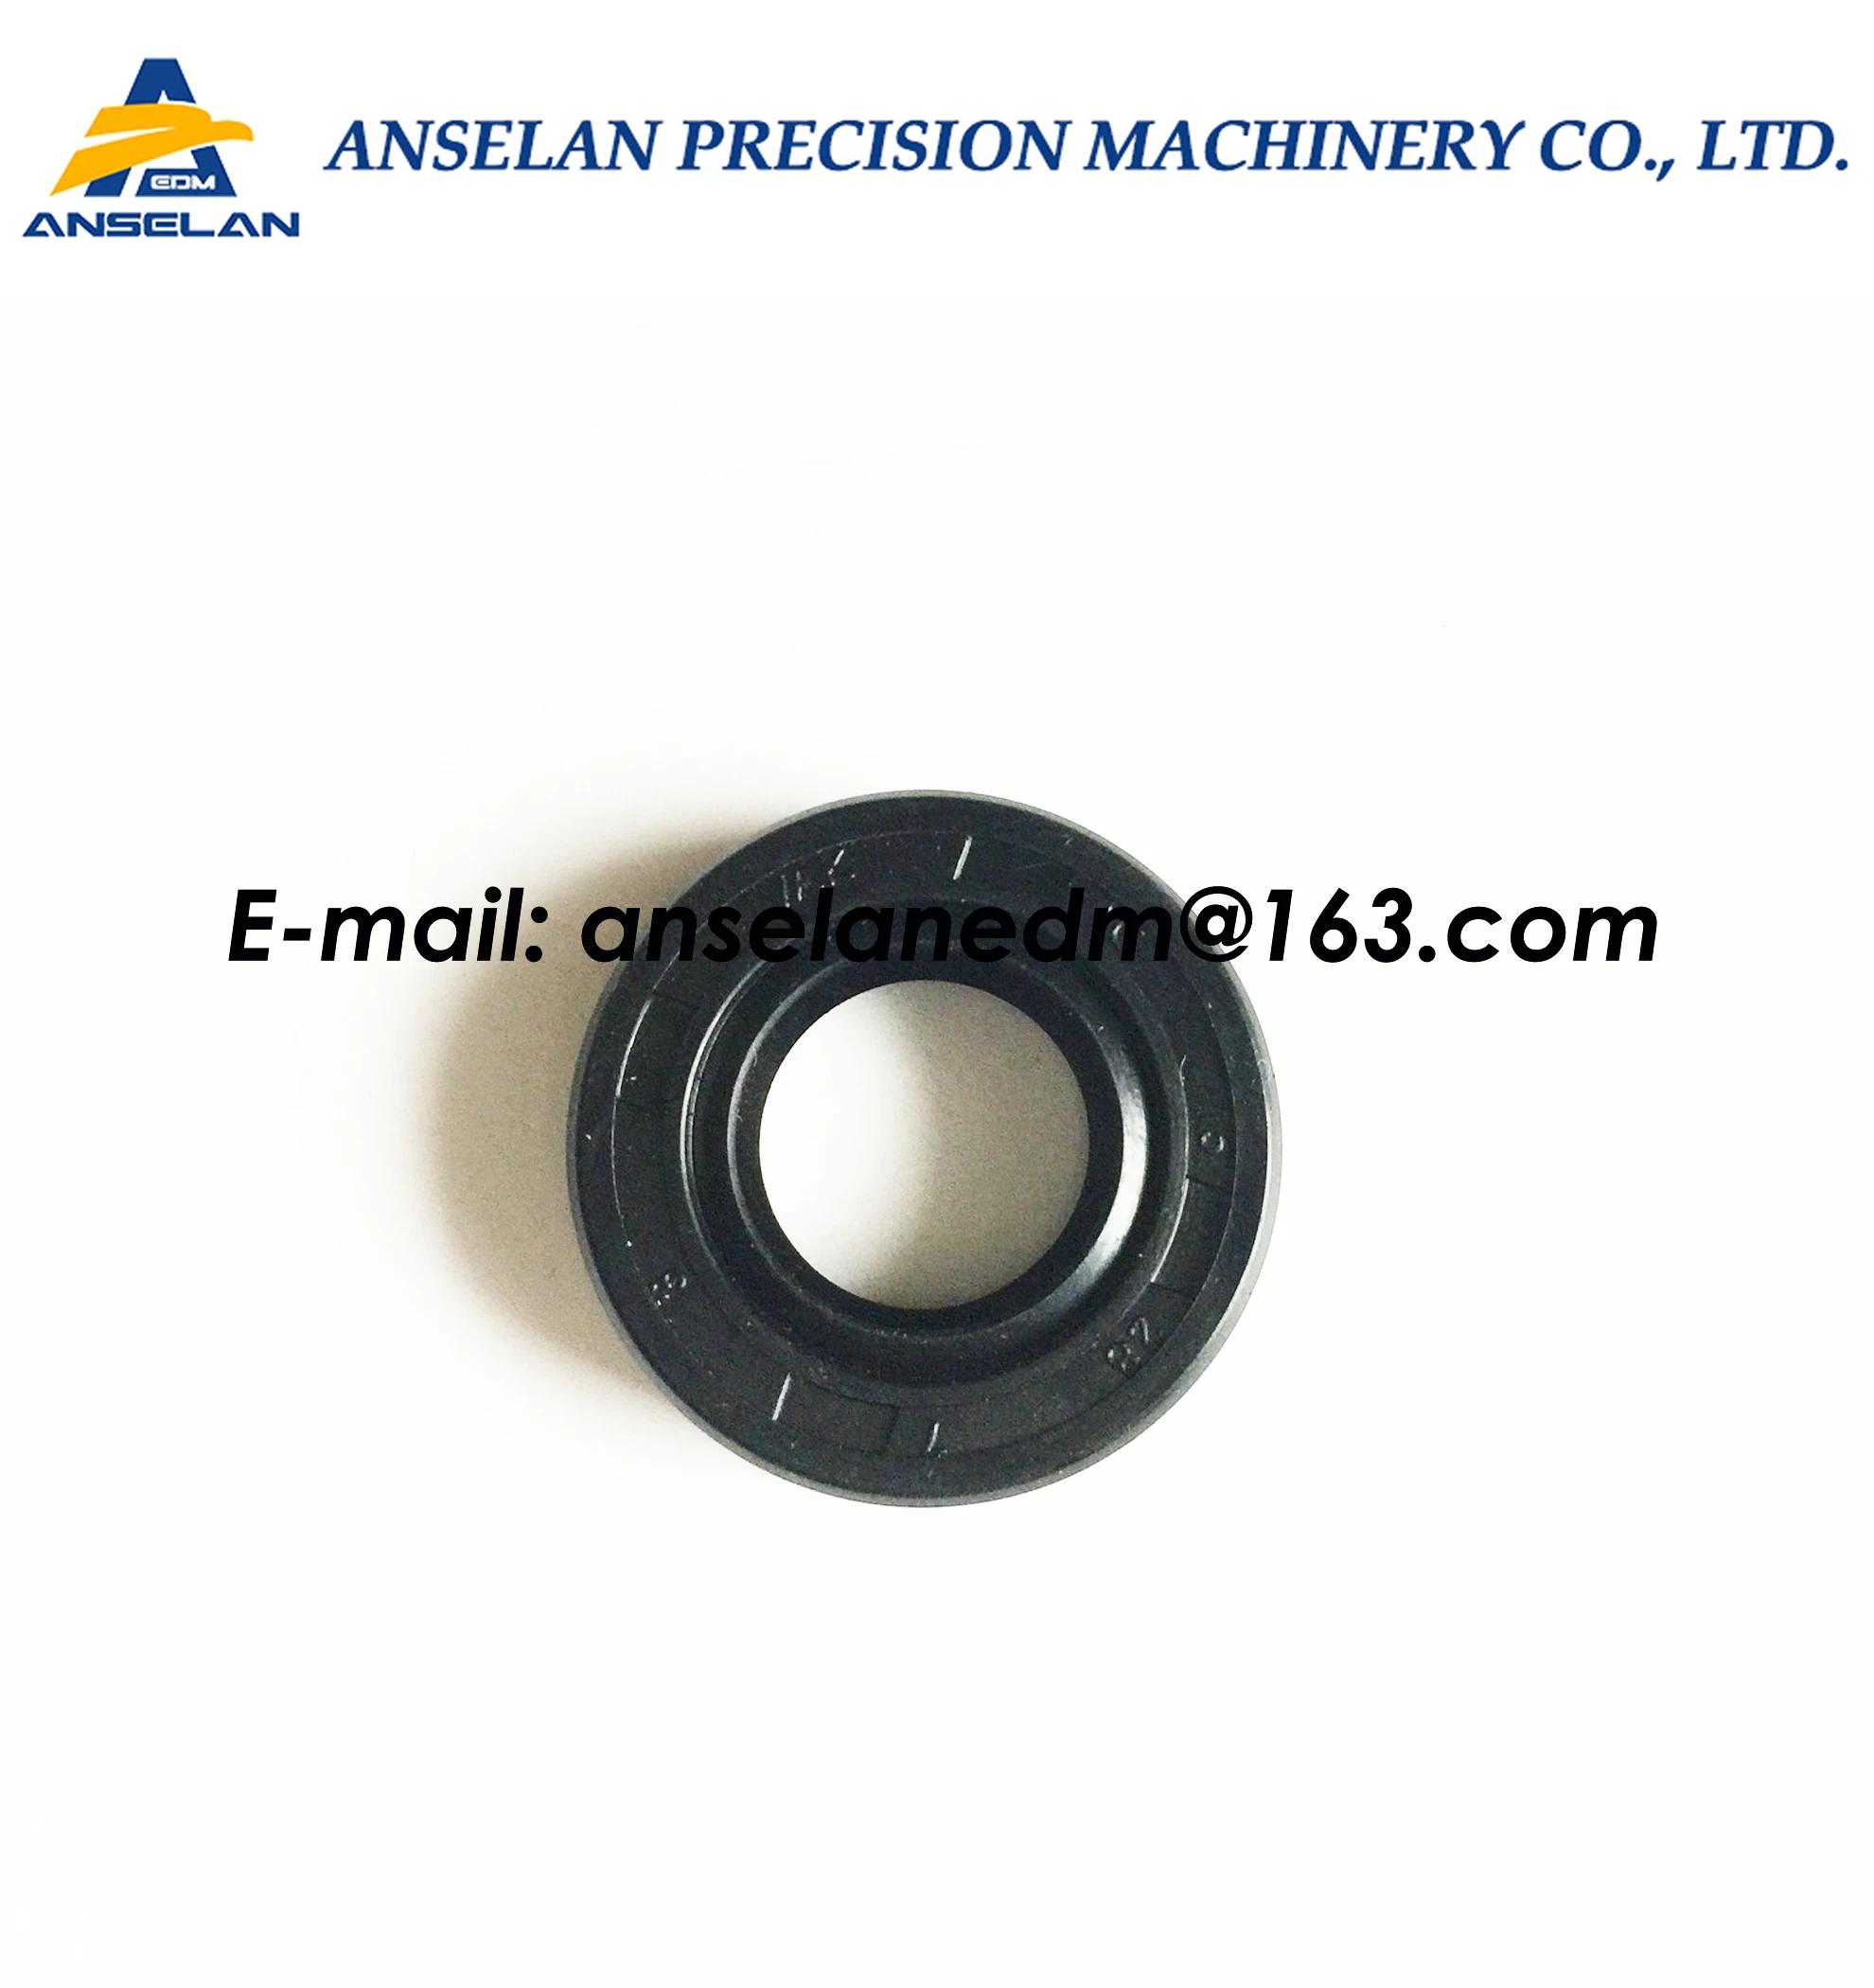 (5pcs) 200544160 edm Extractable seal 544.160 Axle seal 204629190 for Lower TIM head empty for ROBOFIL 190,290,290P,300,310,390,